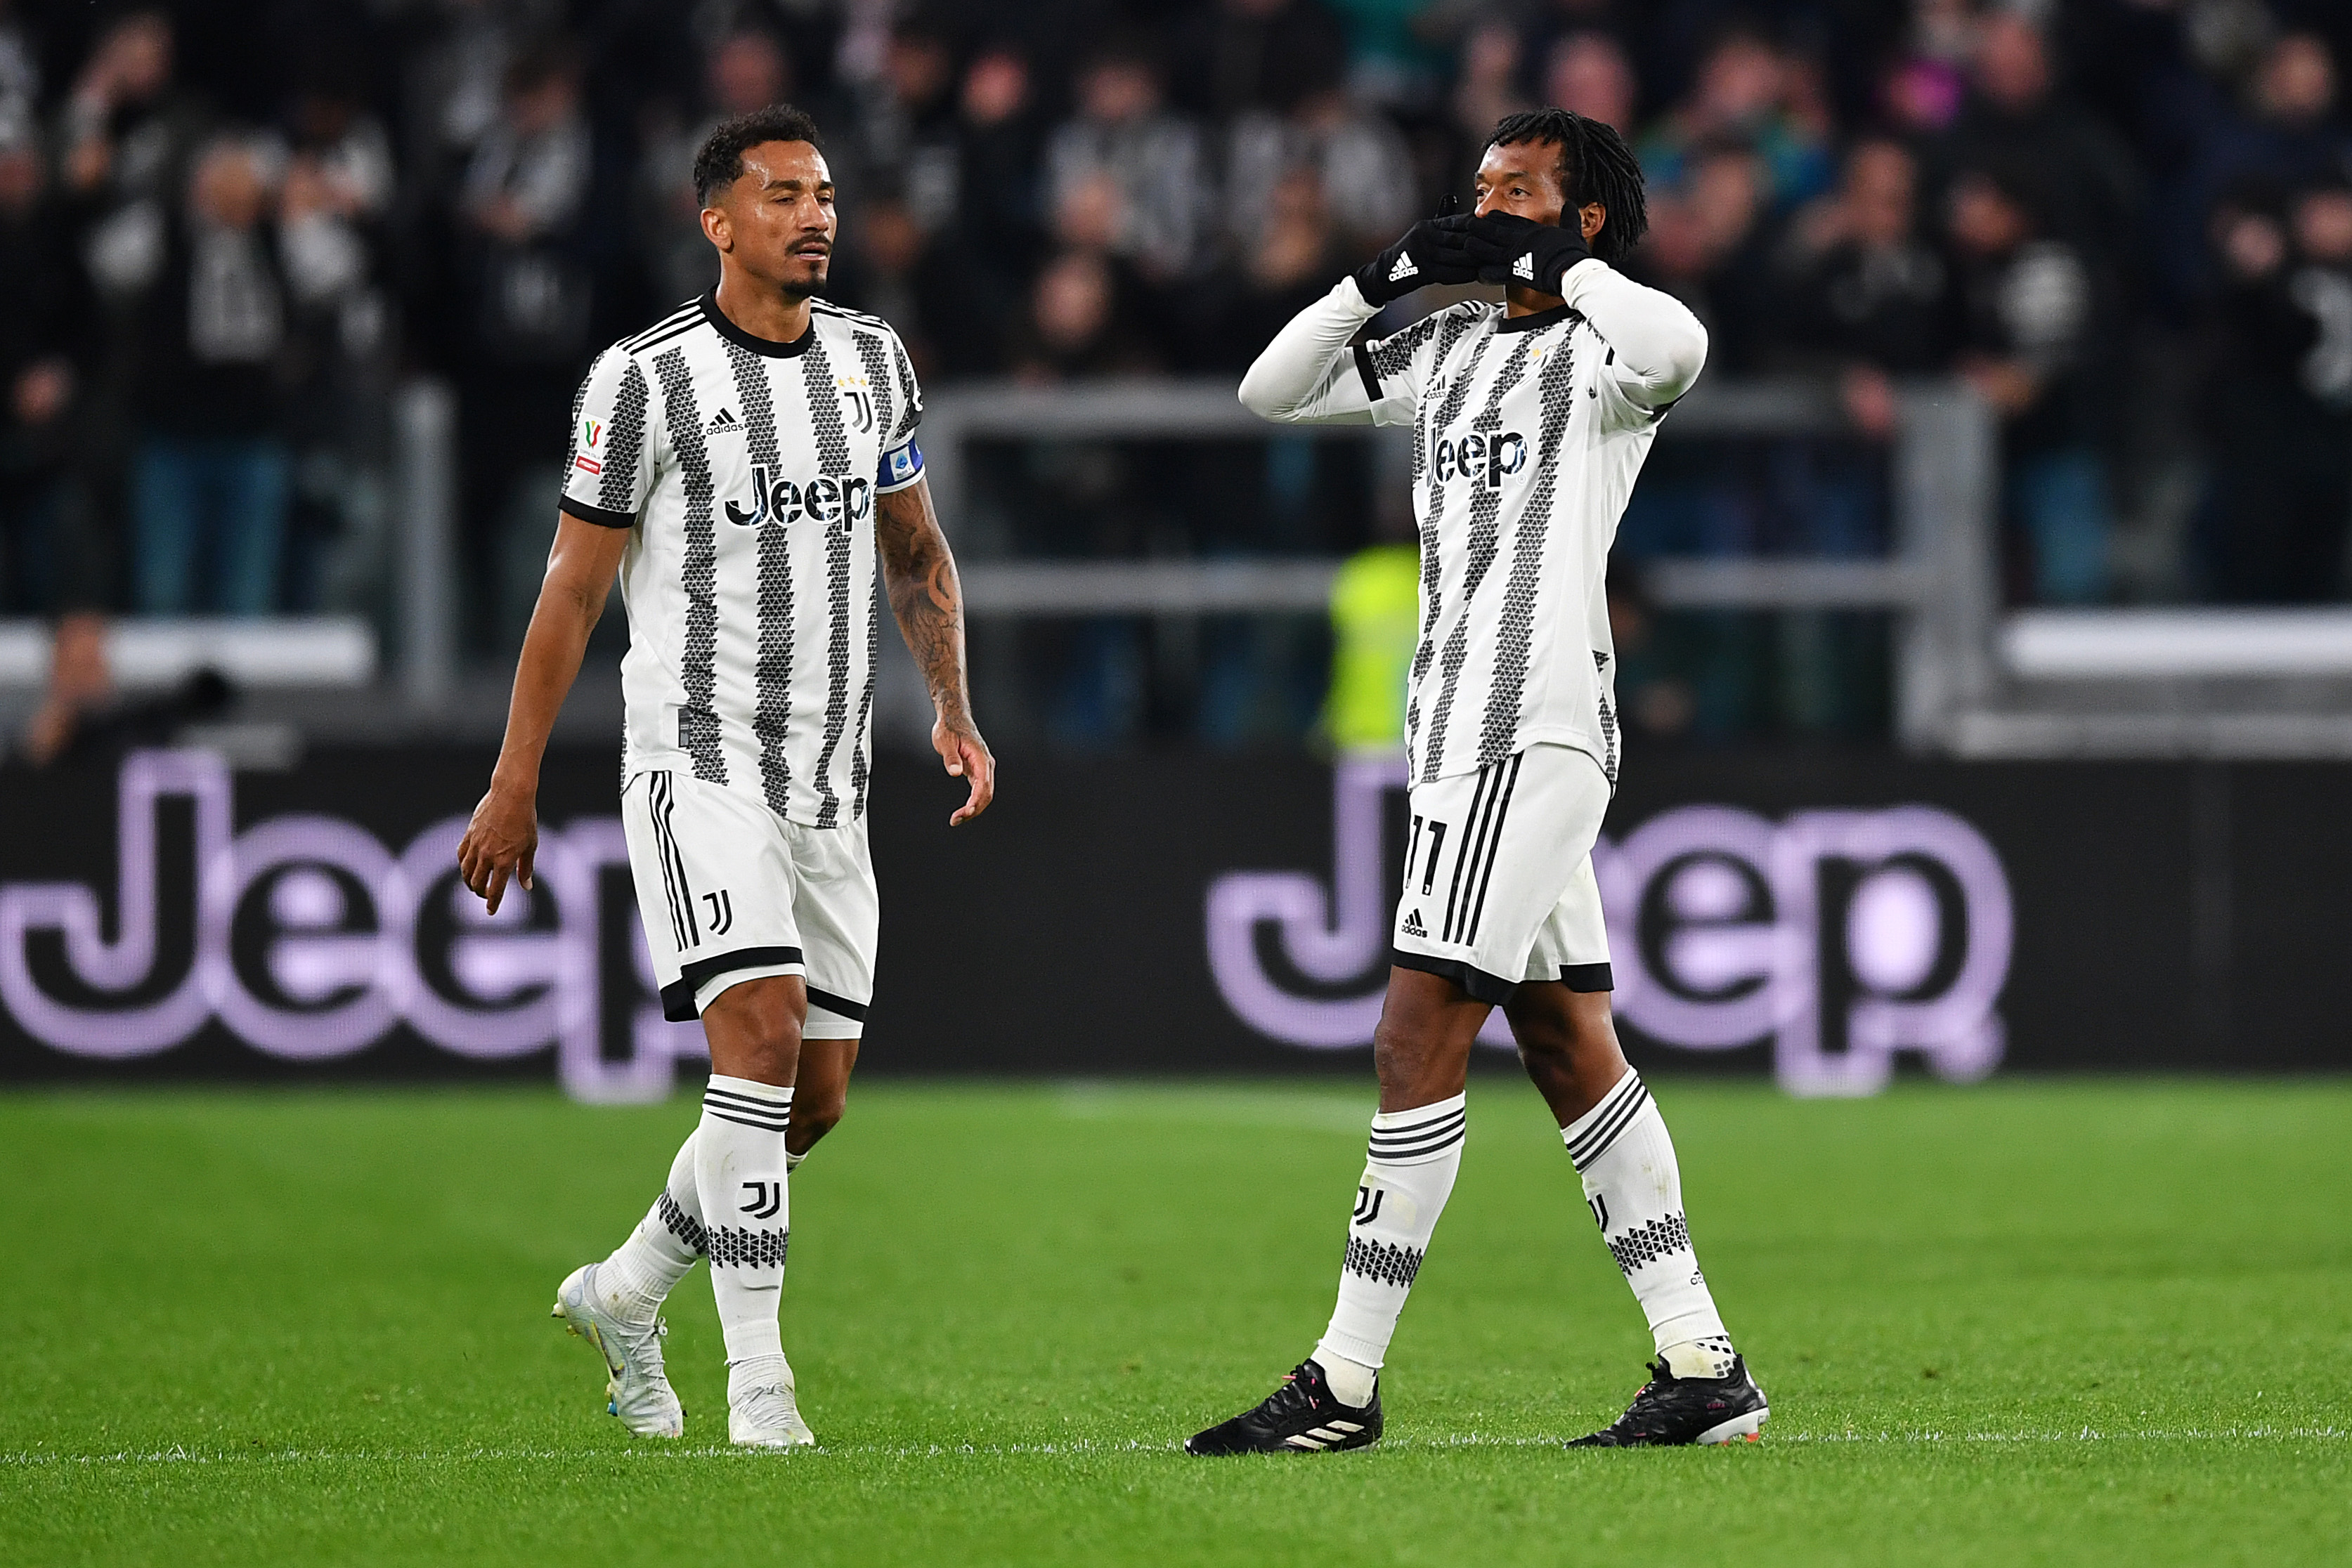 Serie A preview: All you wanted to know about Juventus vs Lecce